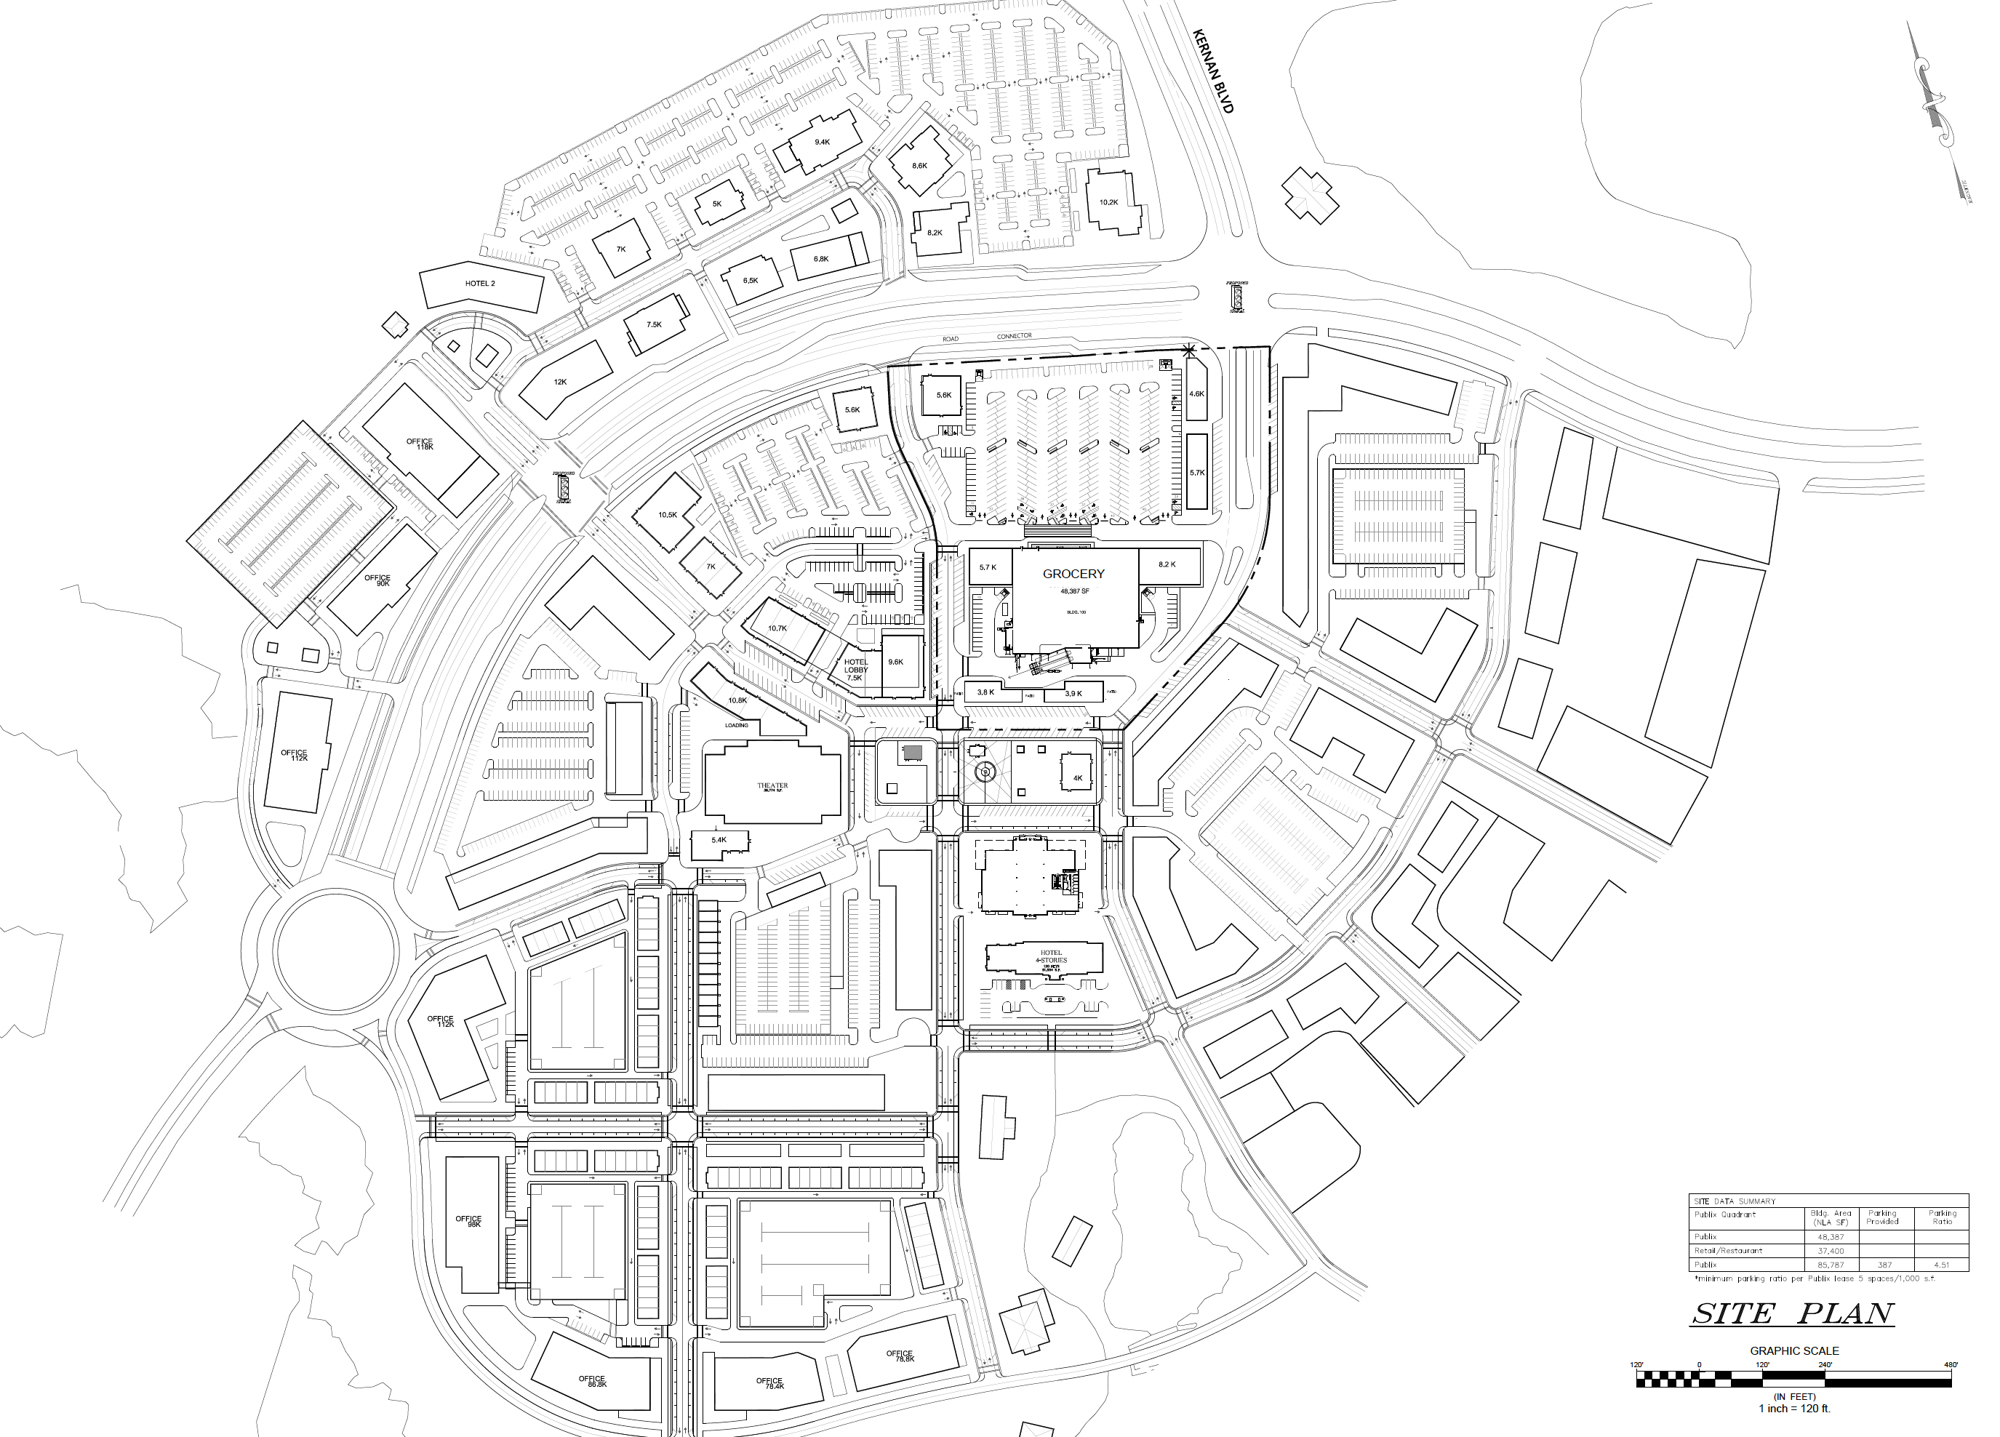 The overall site plan for Highland Row.